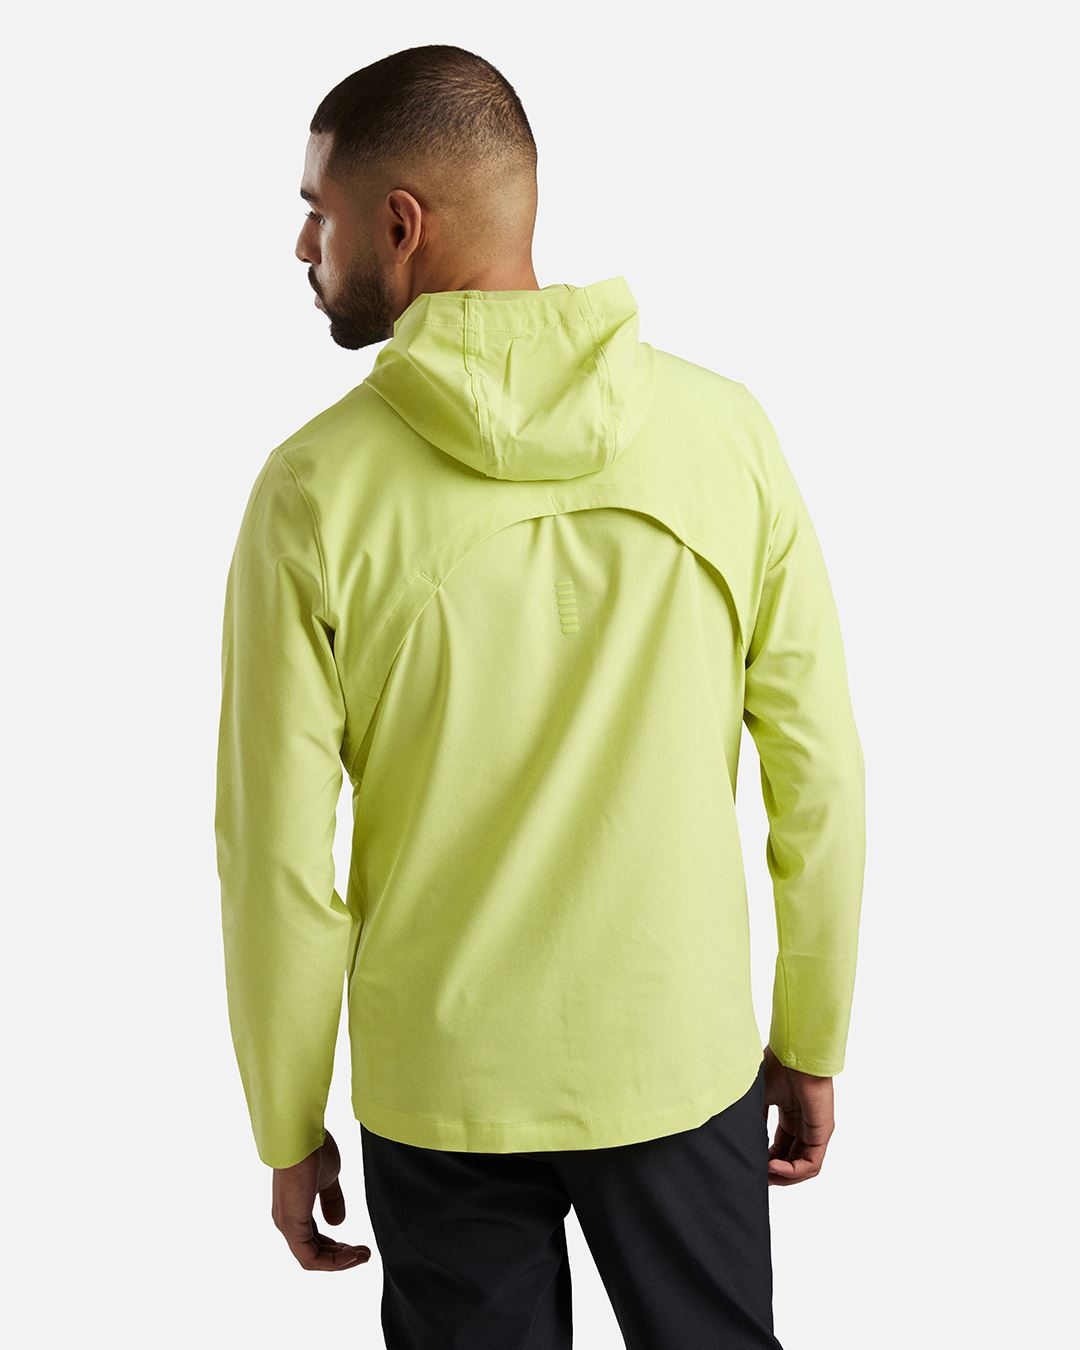 Under Armor Outrun The Storm Jacket - Yellow